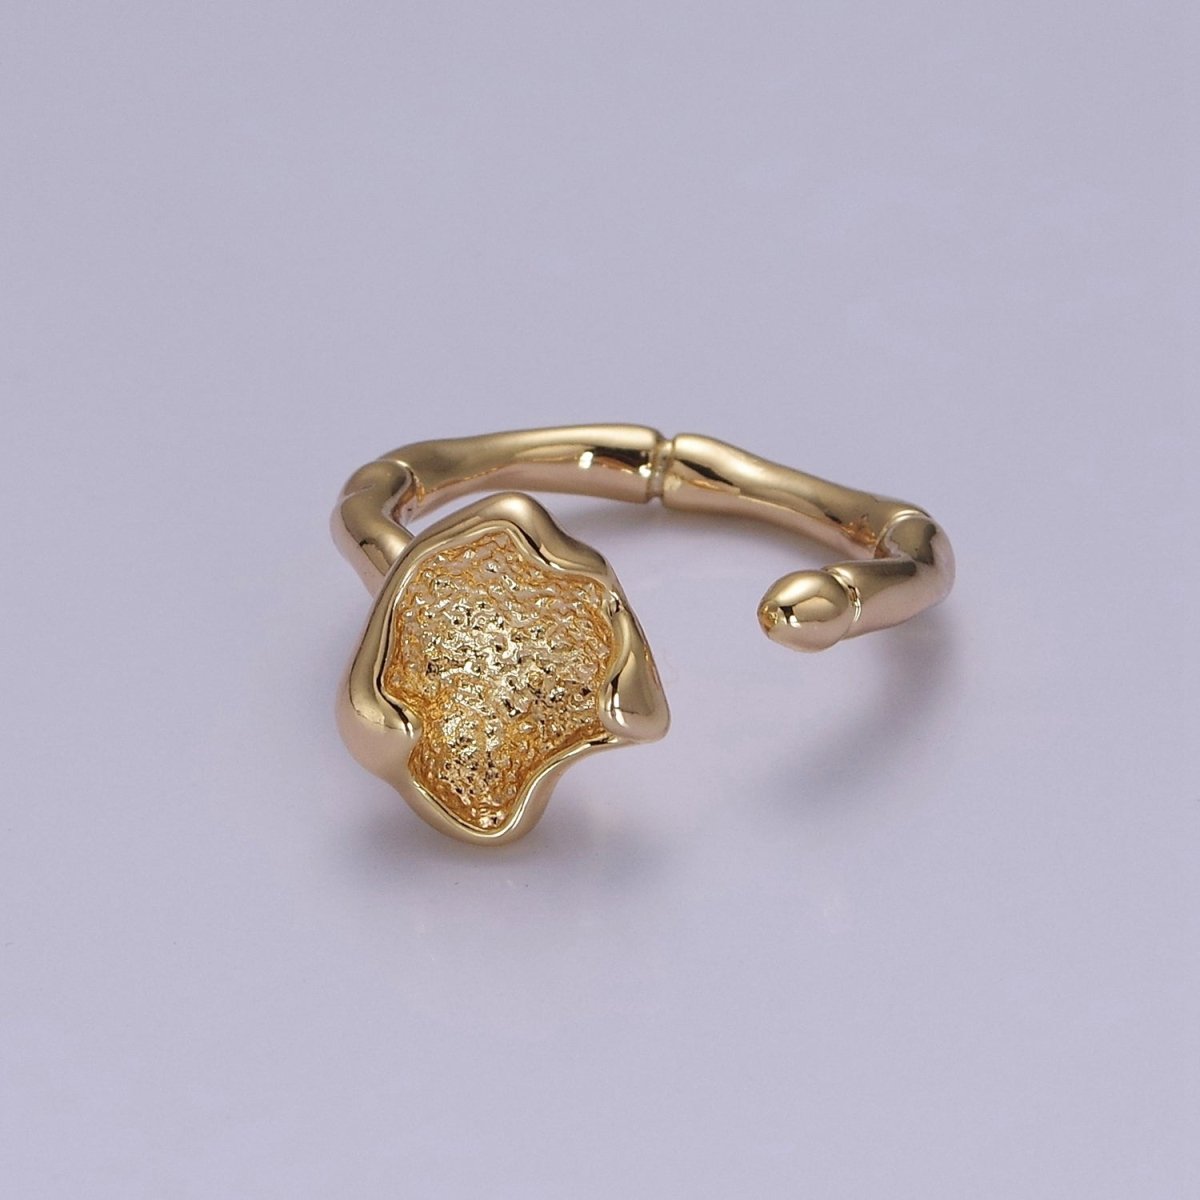 Rustic Flower Patch Gold Flower Ring Open Adjustable O-2036 - DLUXCA